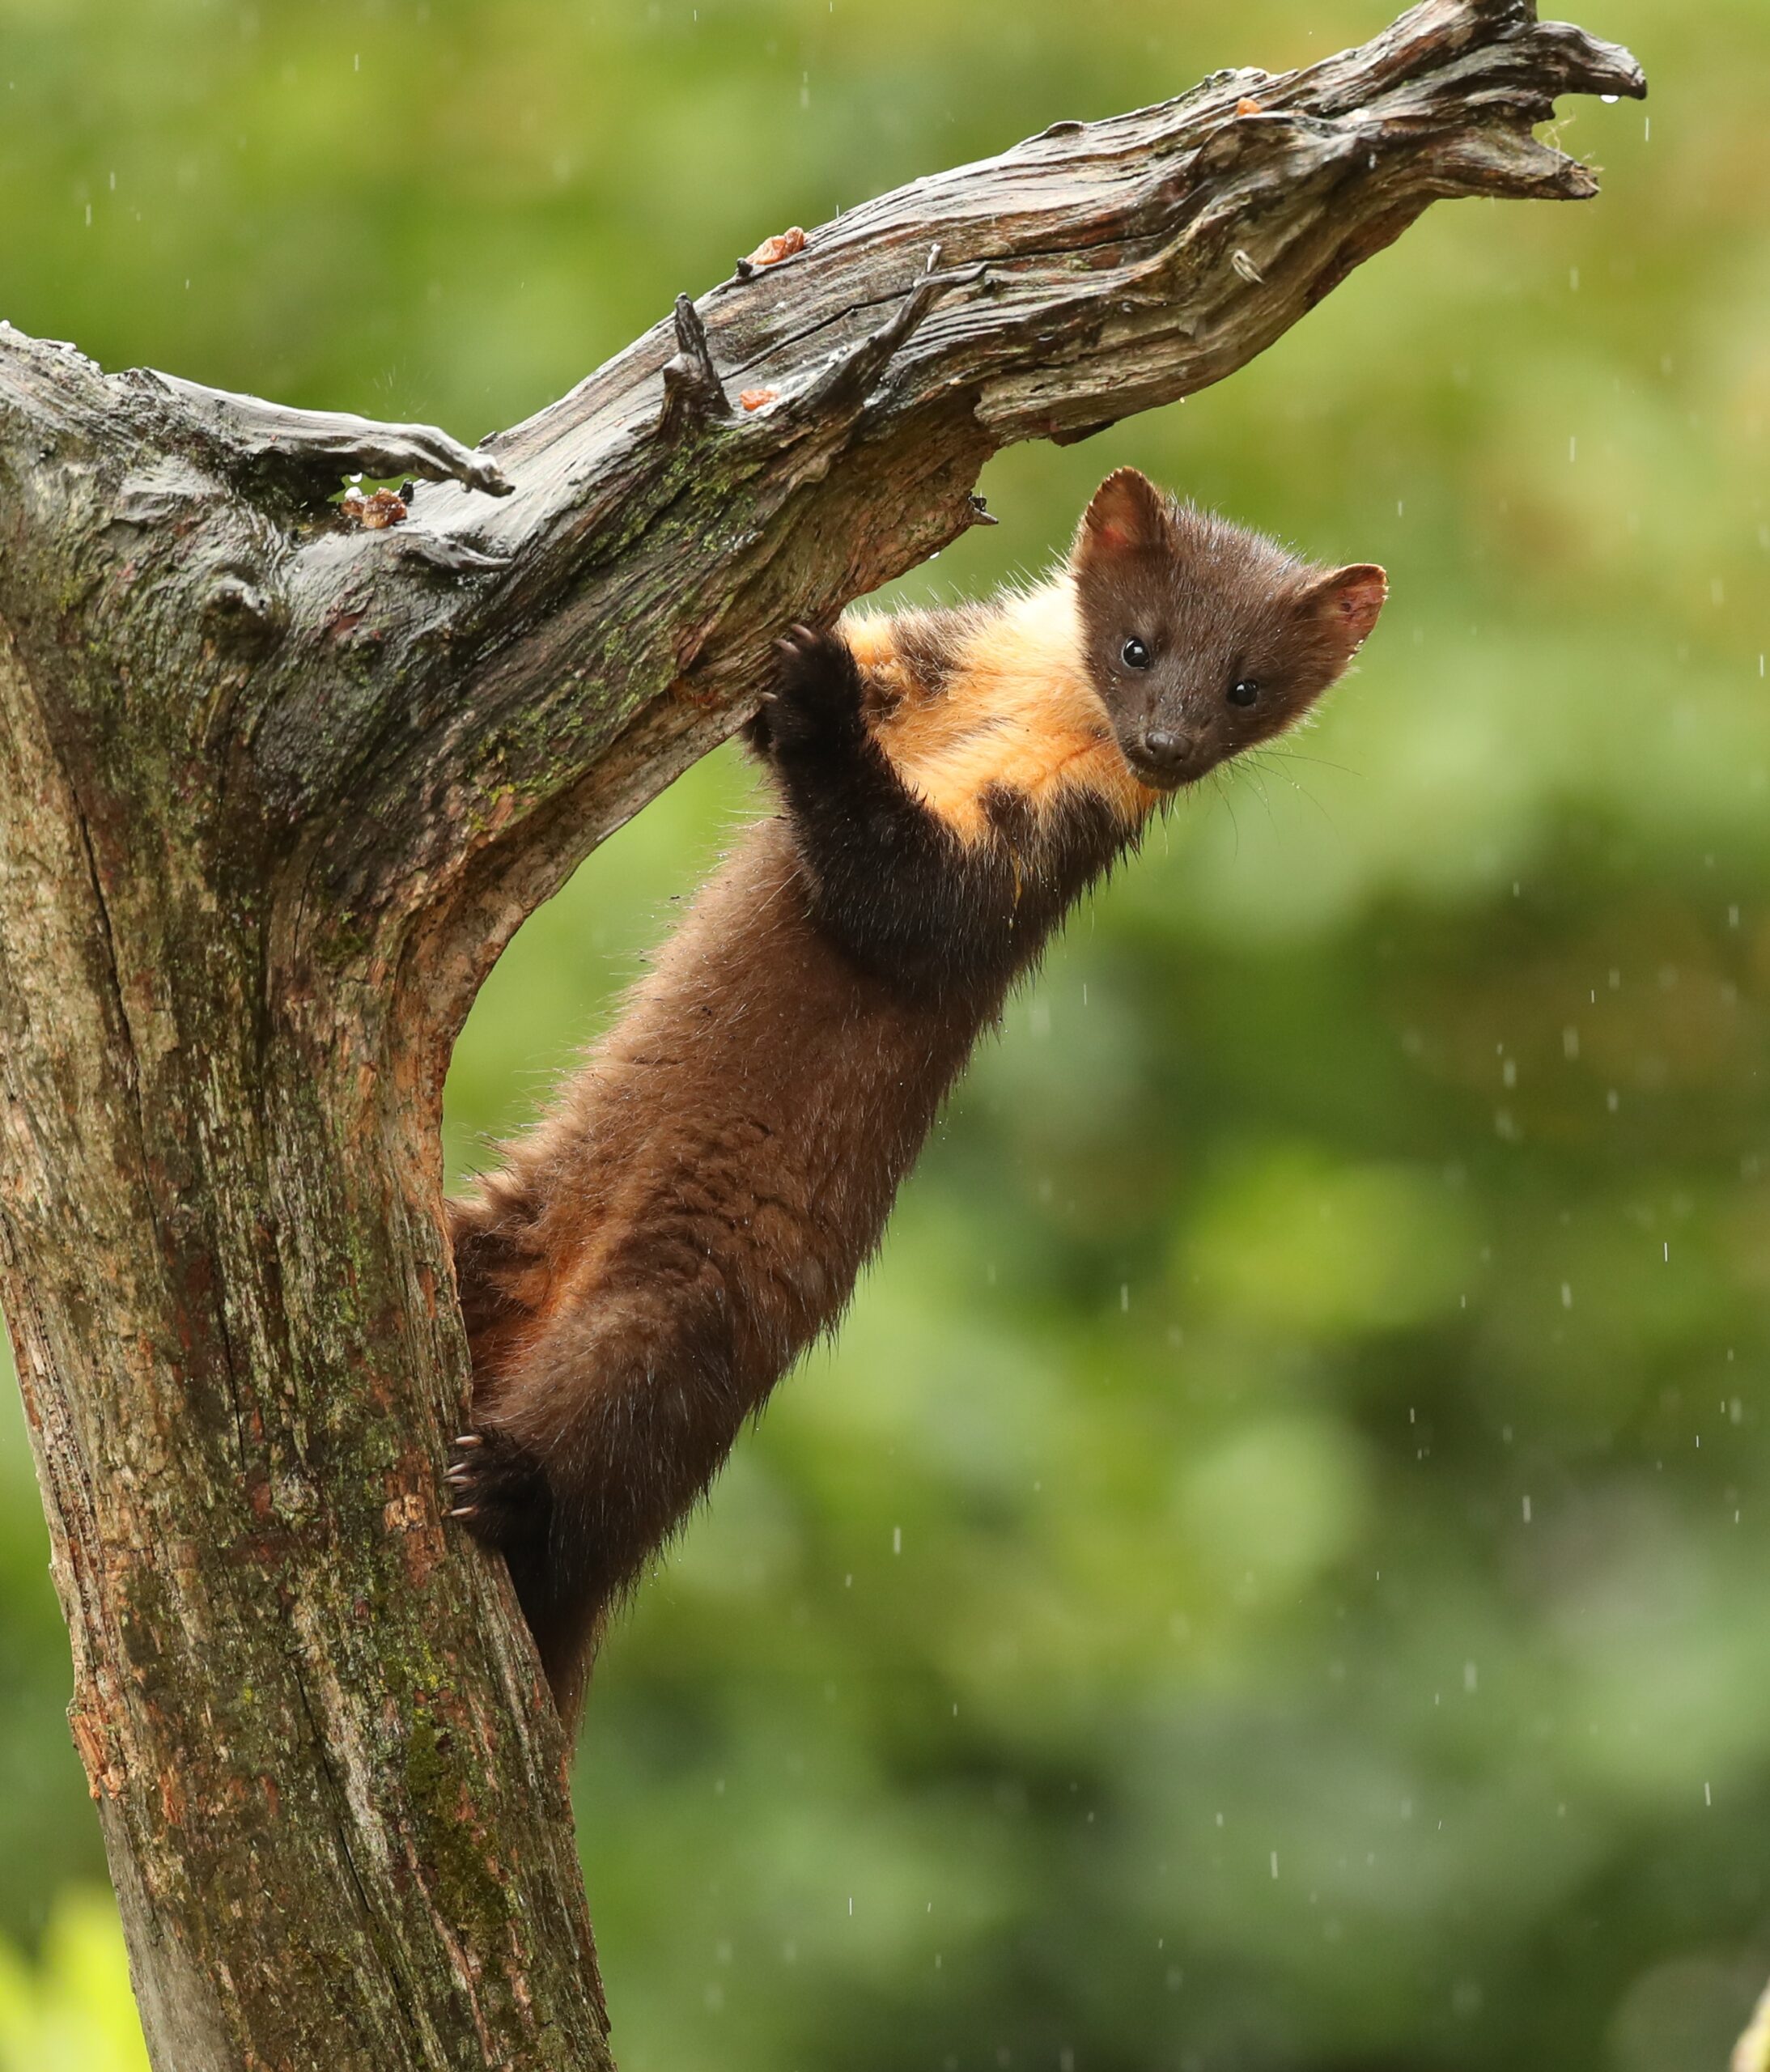 pine marten clinging to a tree trunk in the rain